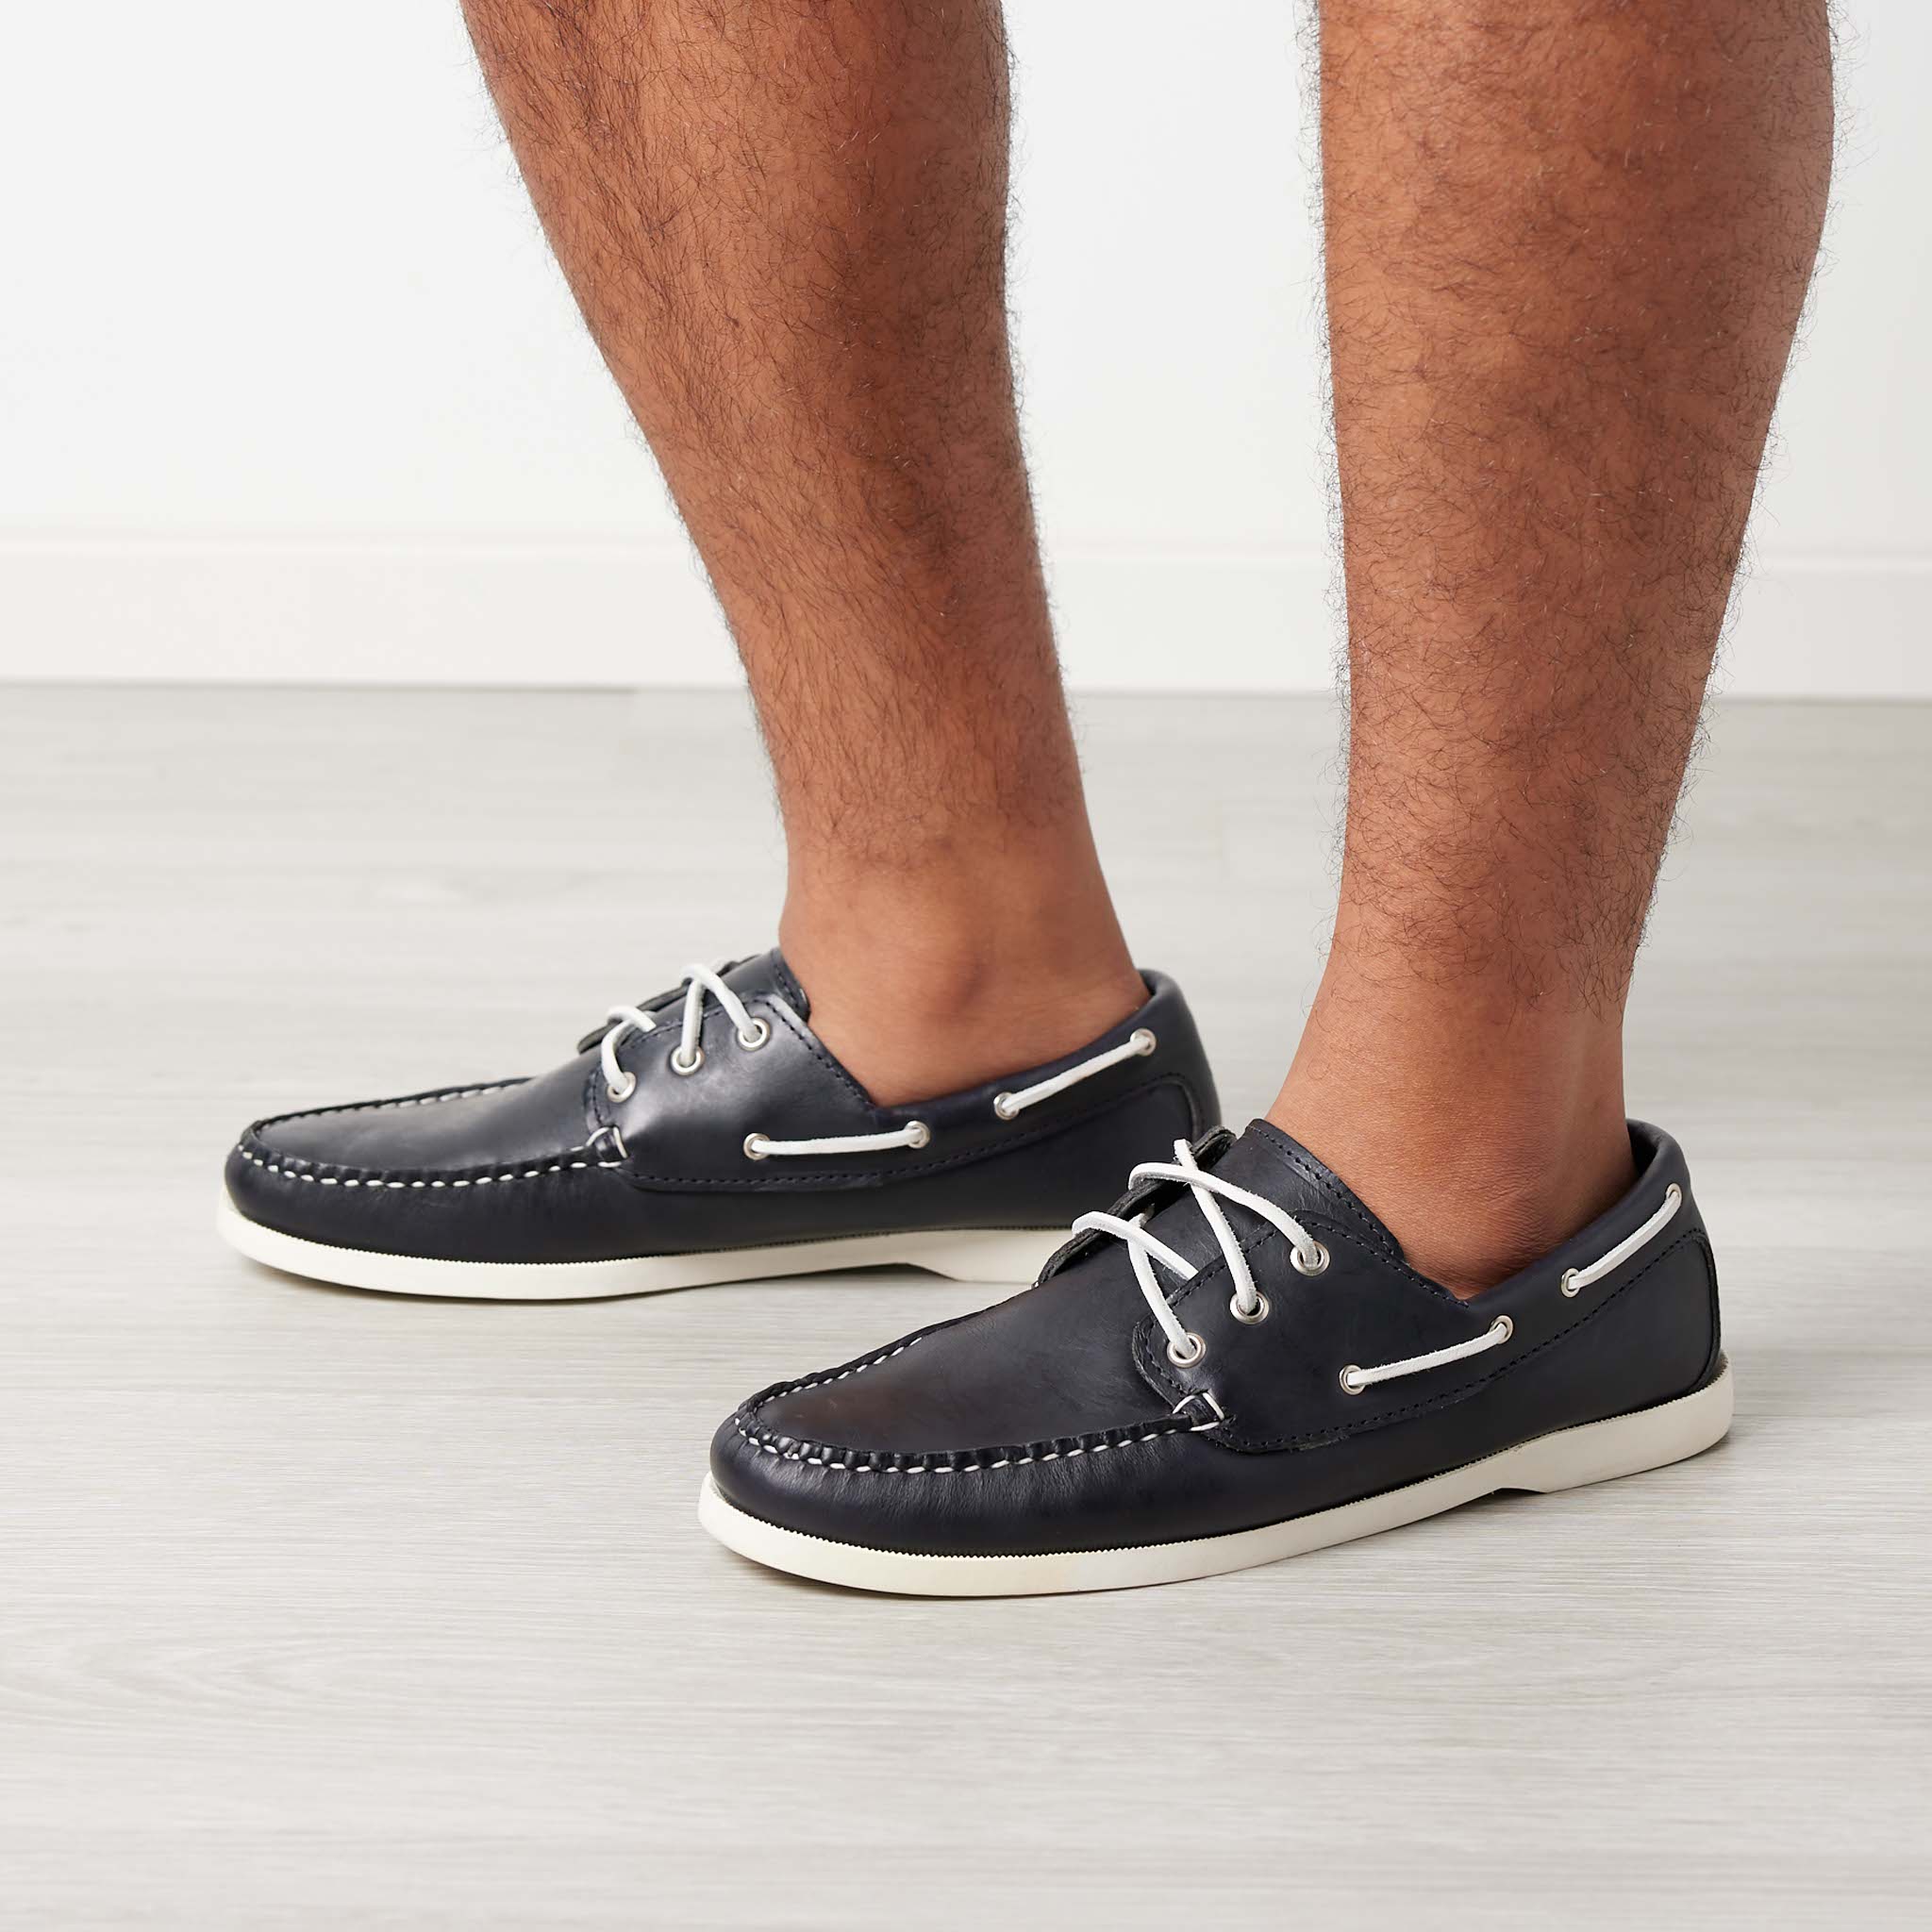 Men's Boat Shoes Styling Guide